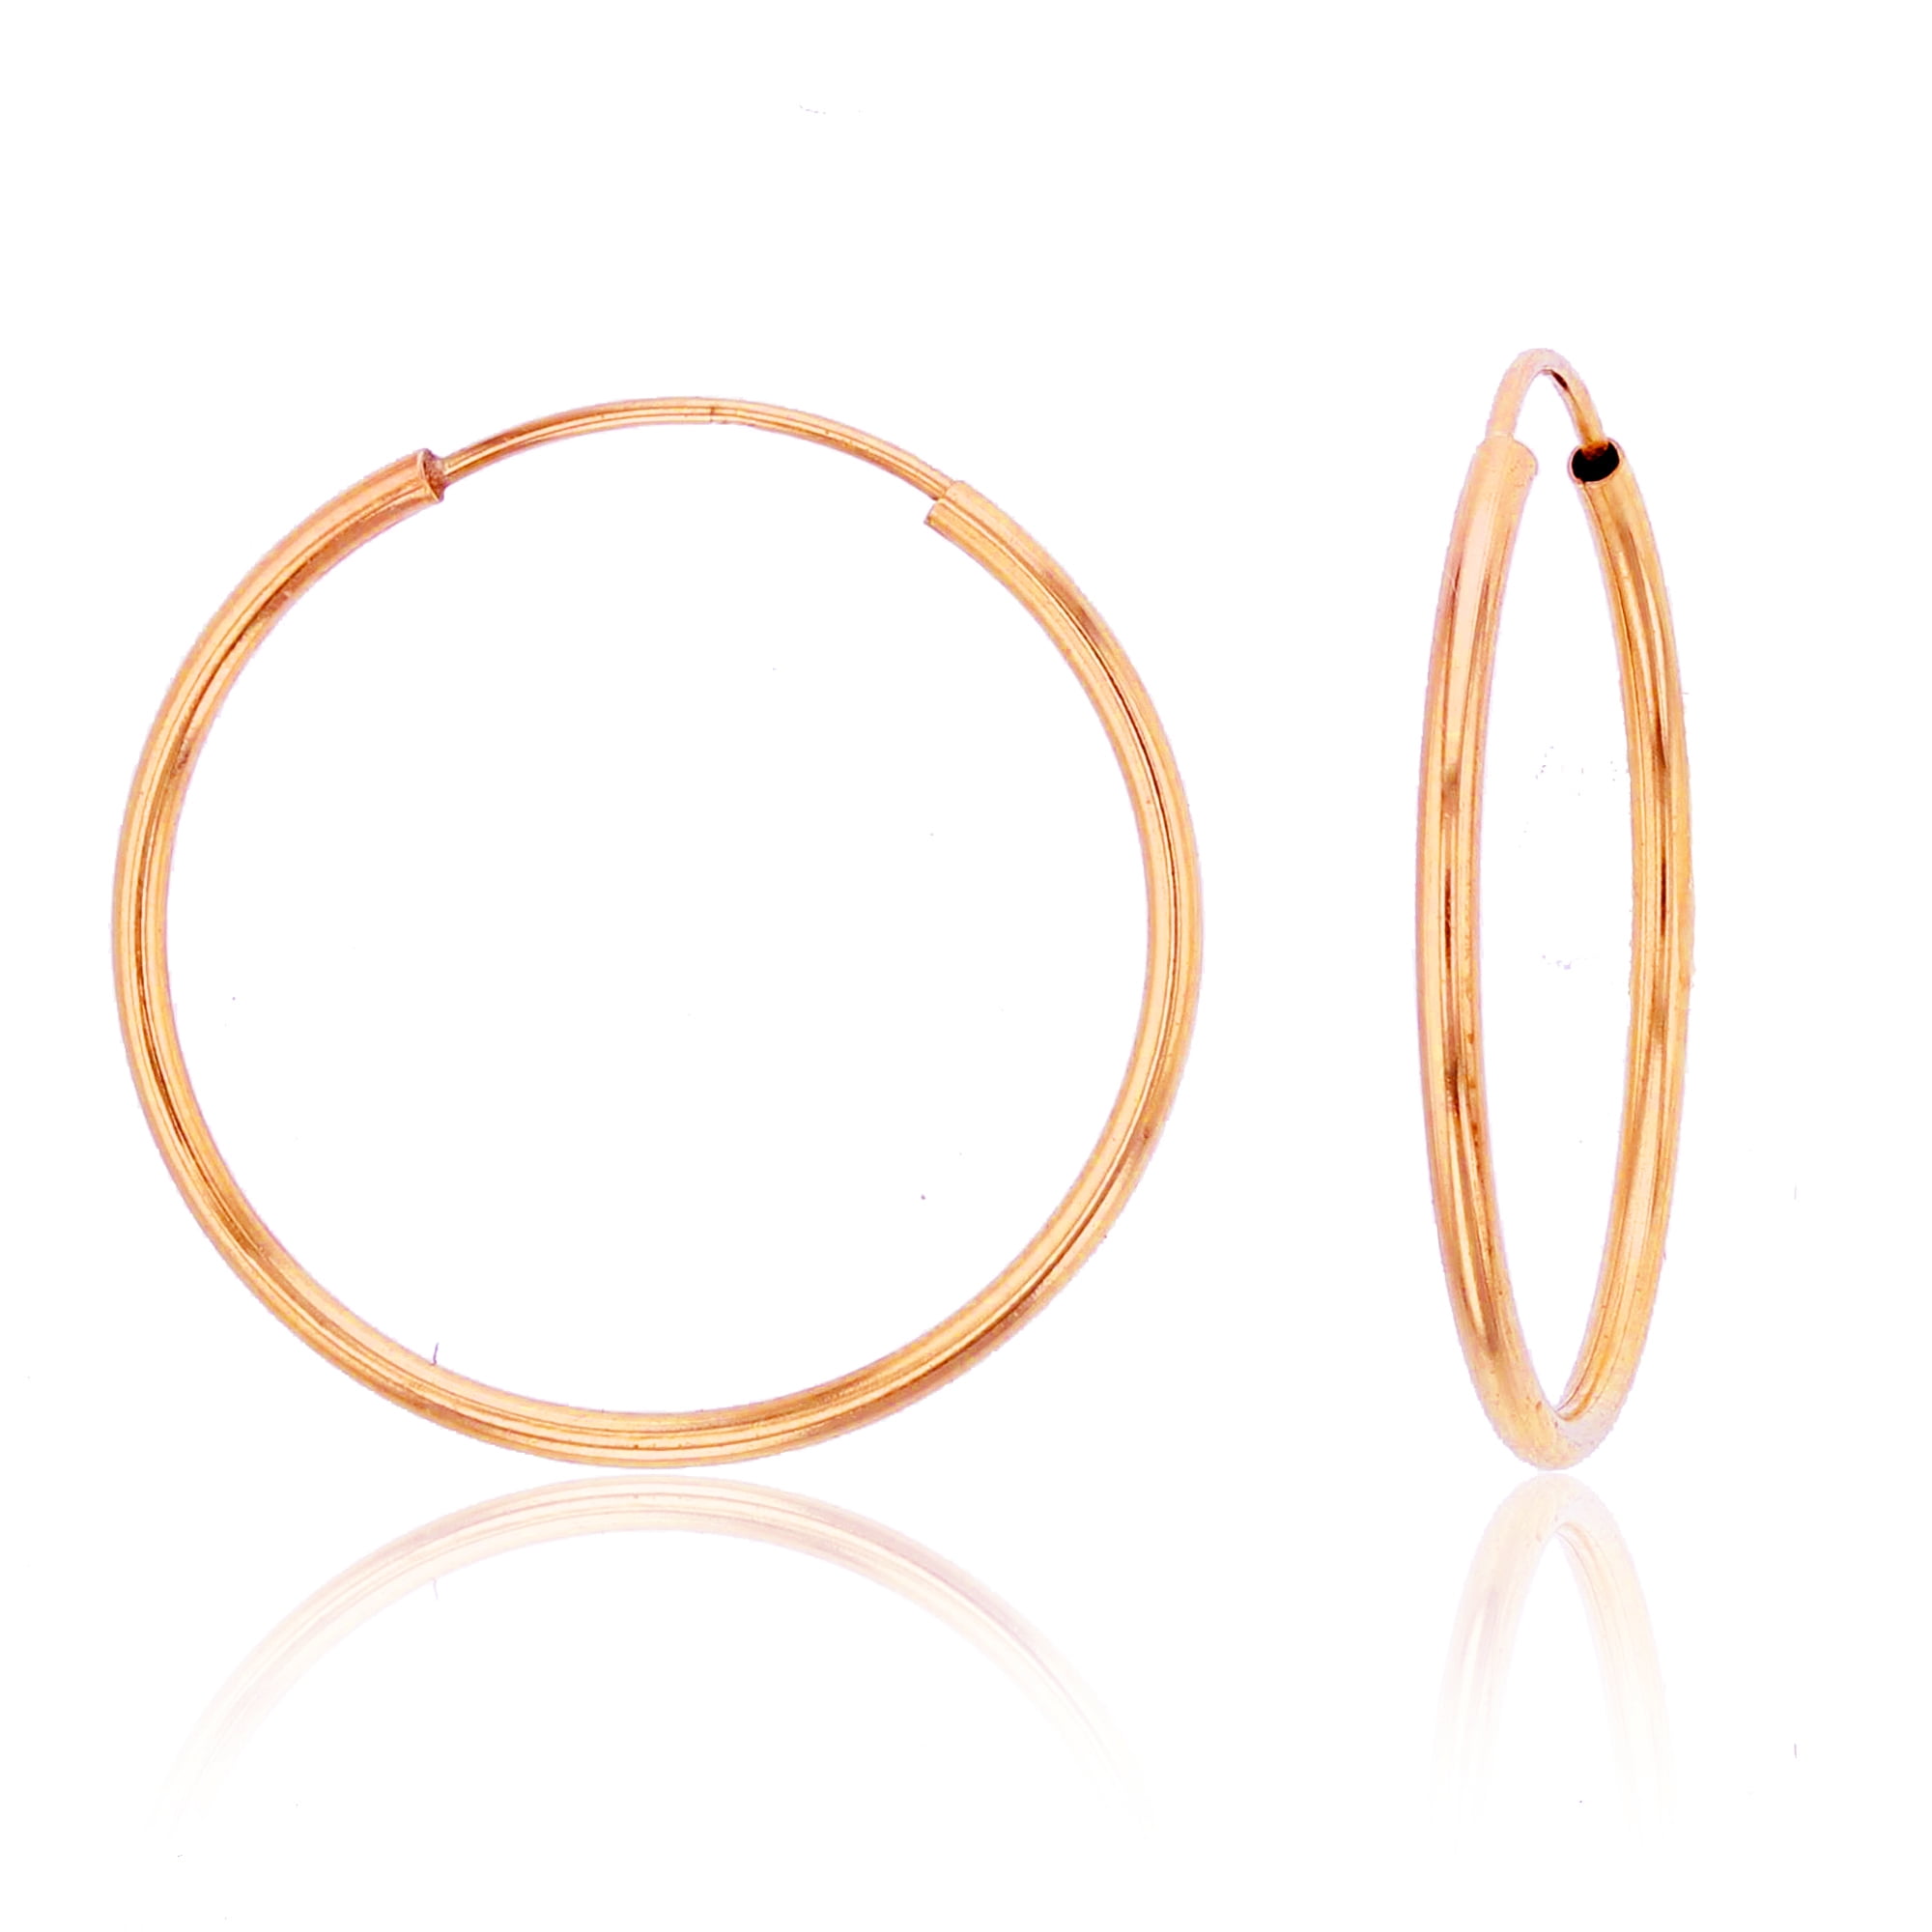 Gold hoop earrings for cartilage multiple commands produce xcode